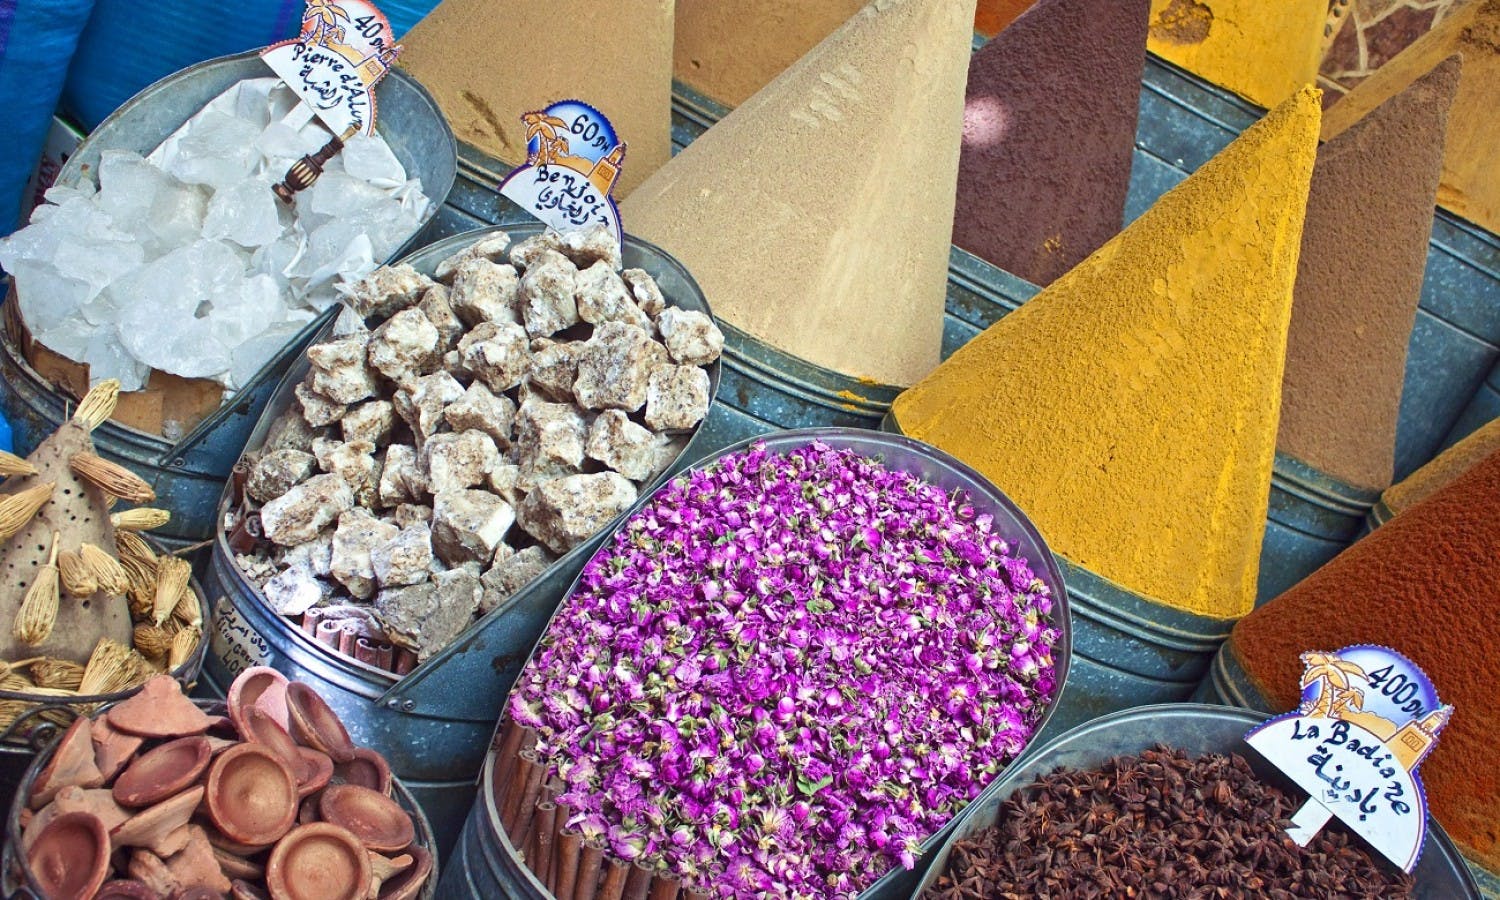 Marrakech Full Day Guided Tour with Lunch